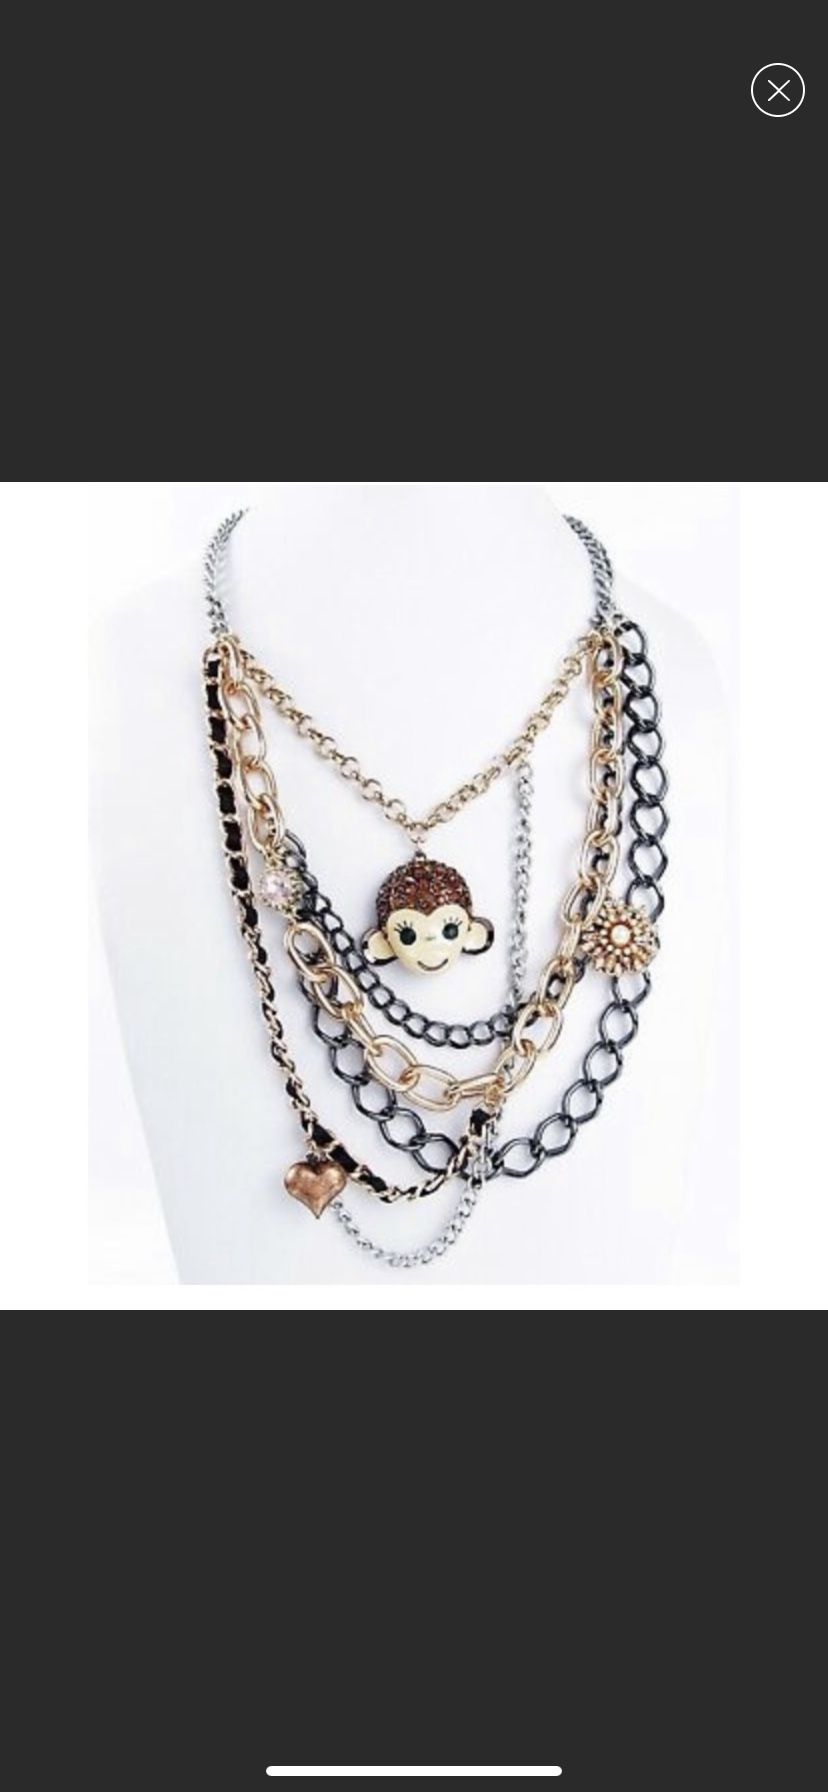 Betsey Johnson Monkey Face Multi-Chain & Charms Necklace Jewelry